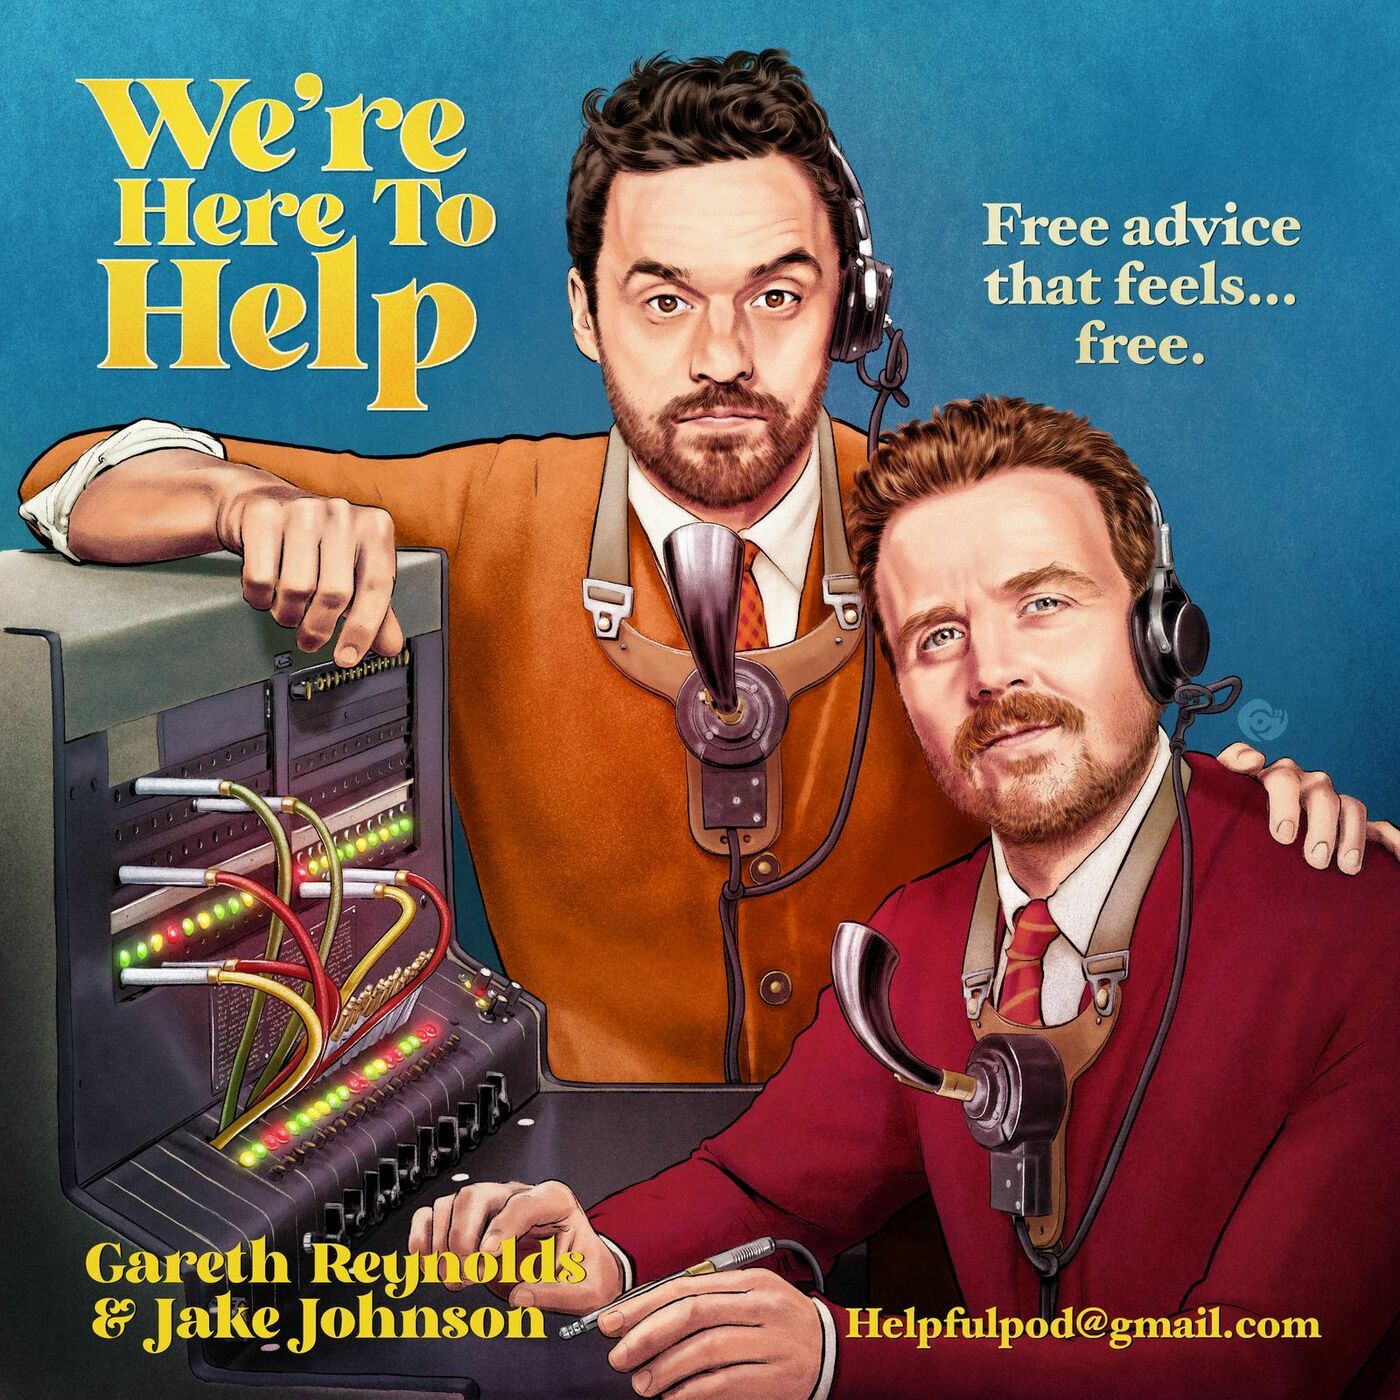 We're Here to Help podcast show image